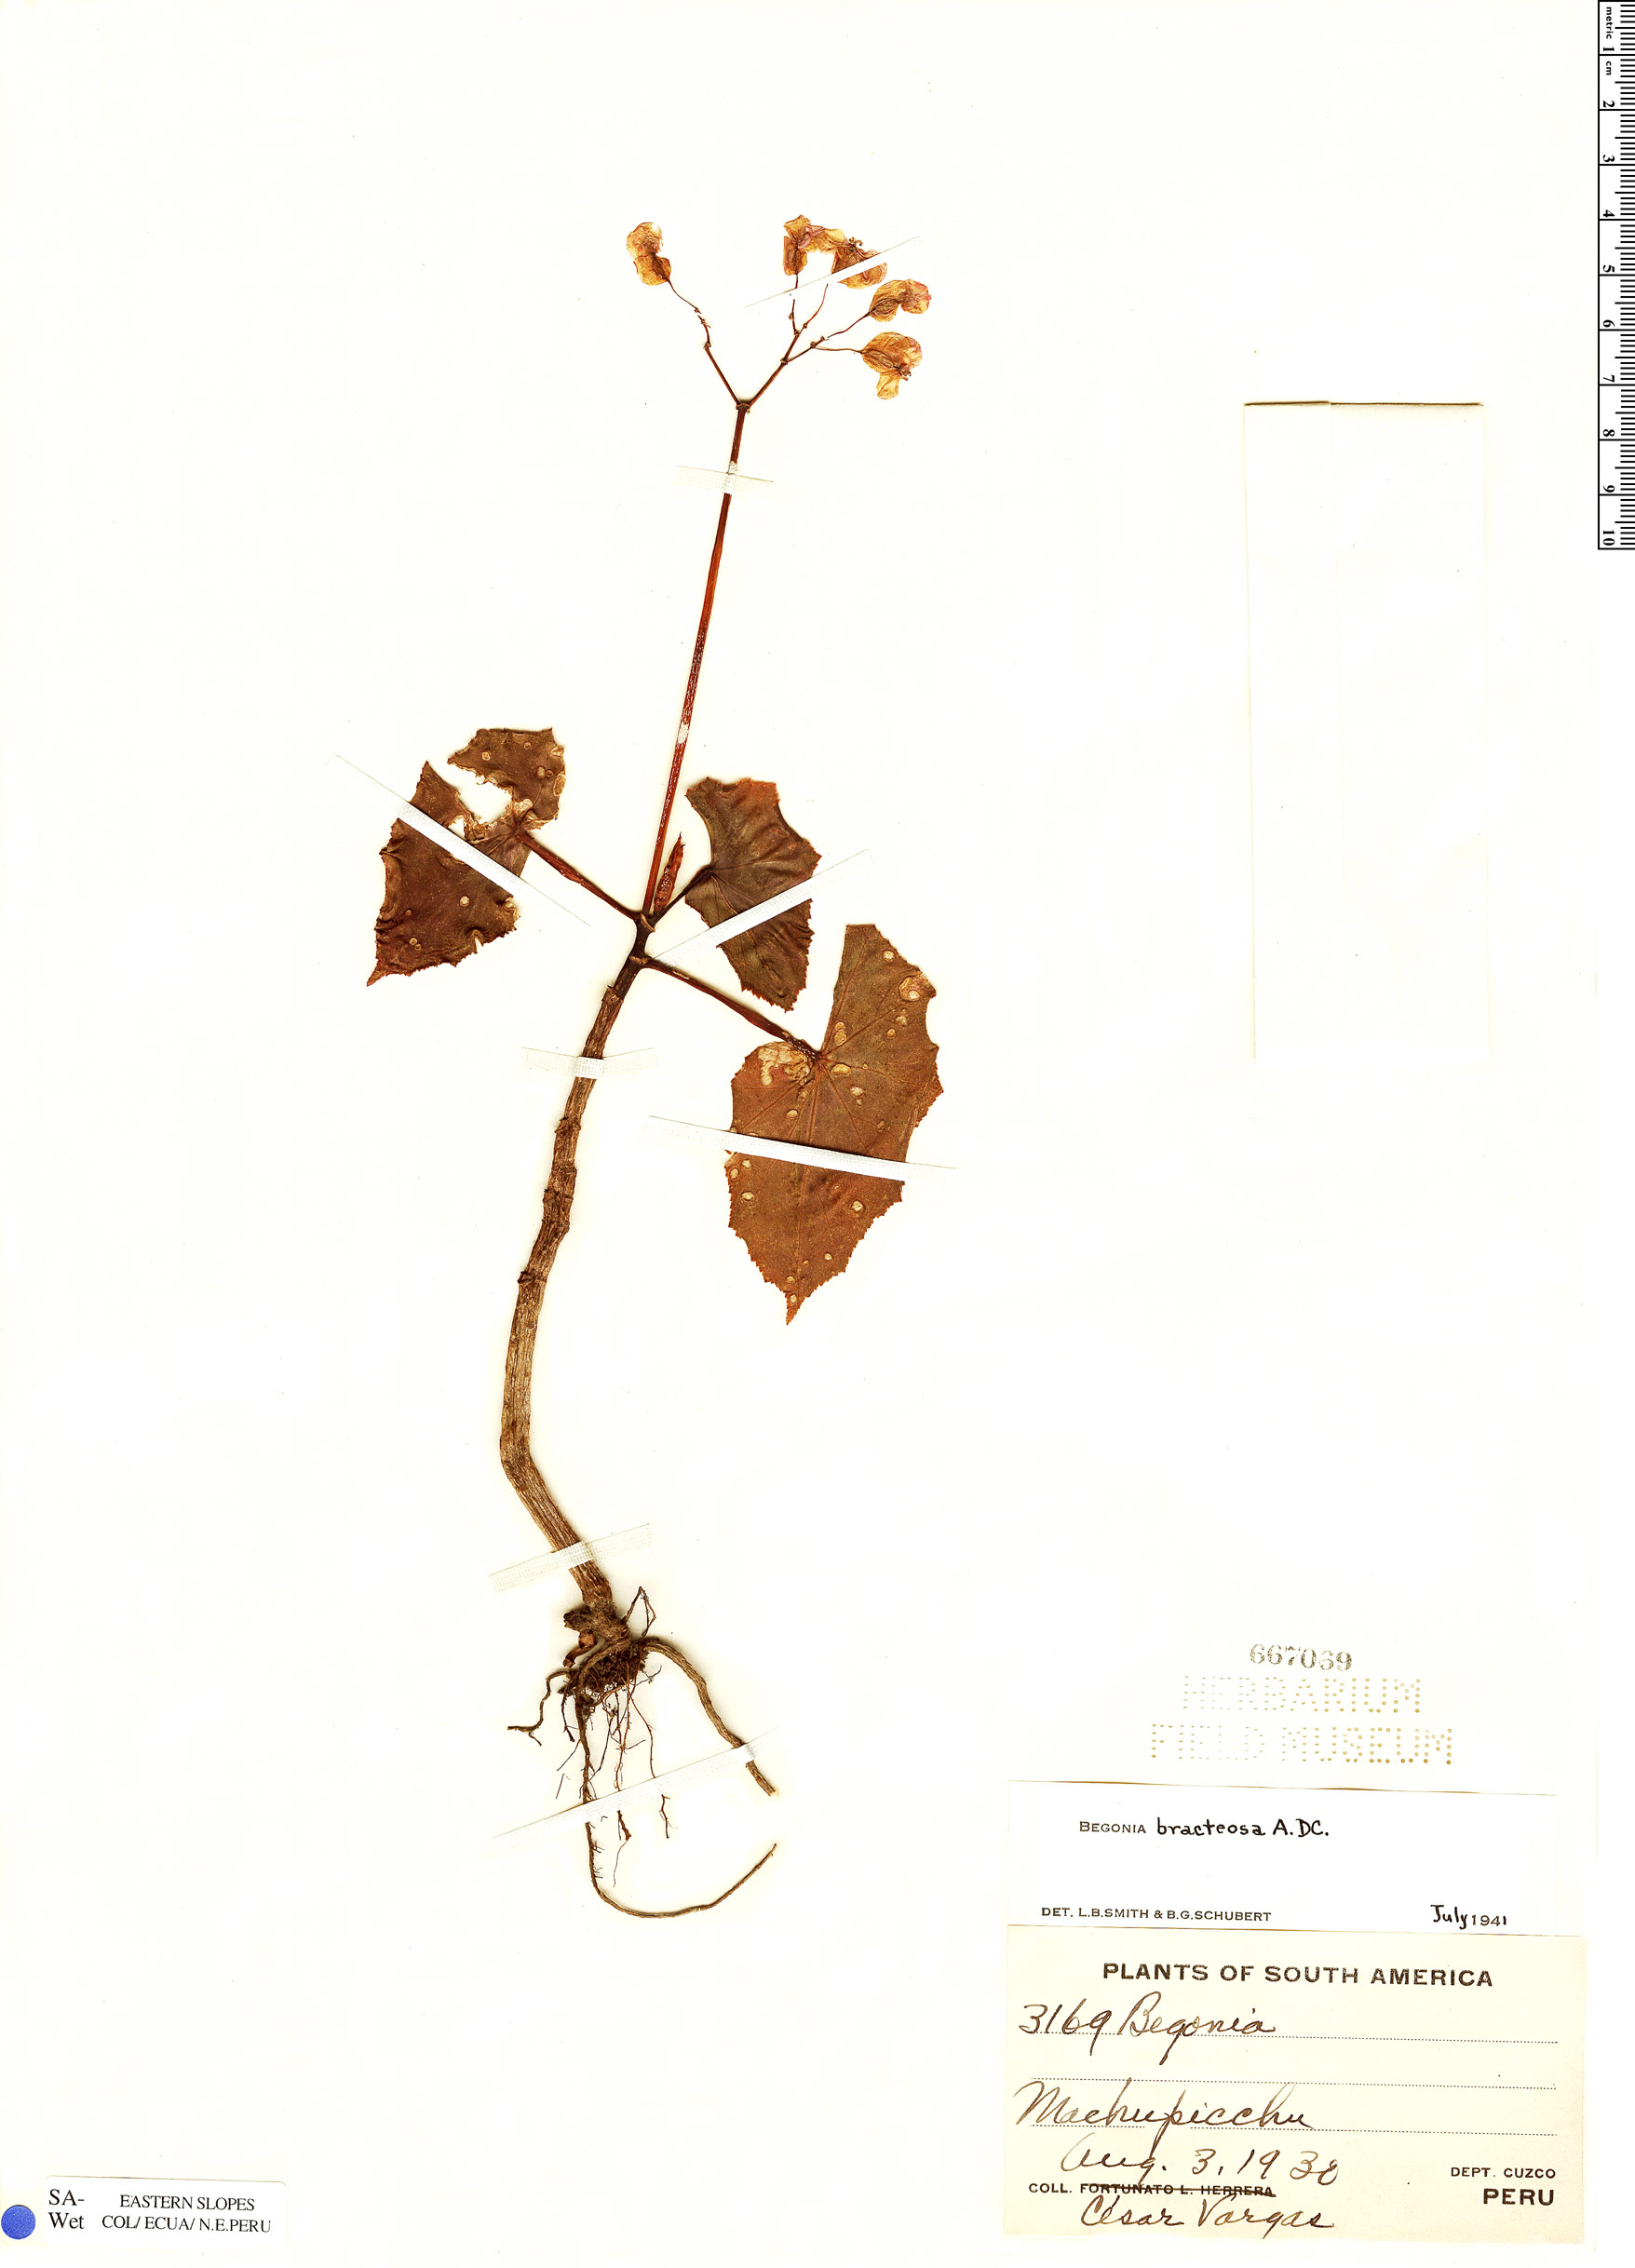 Begonia bracteosa | Rapid Reference | The Field Museum